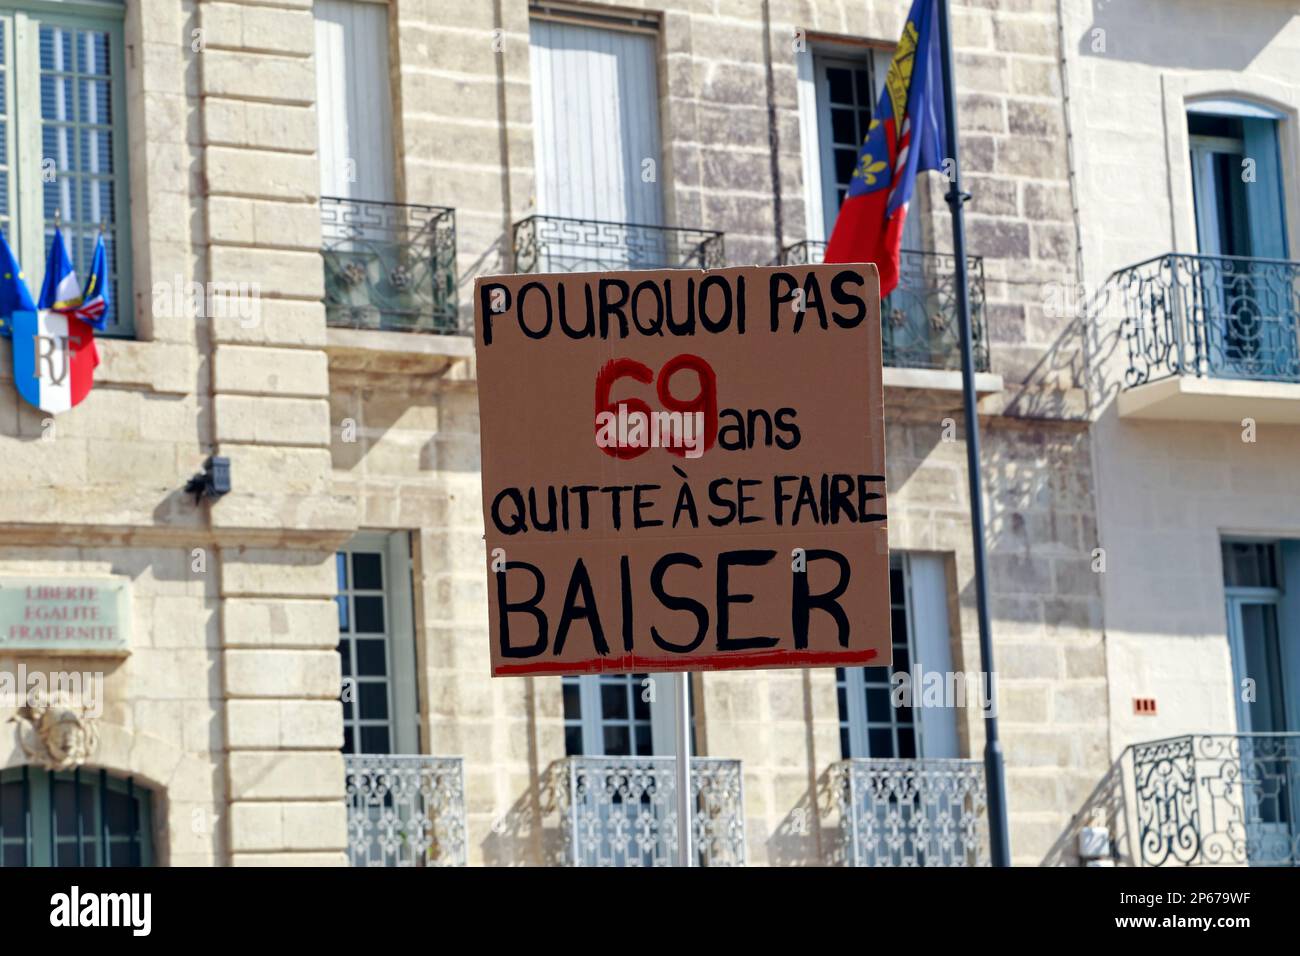 Demonstration against the new pension reform. Beziers, Occitanie, France Stock Photo